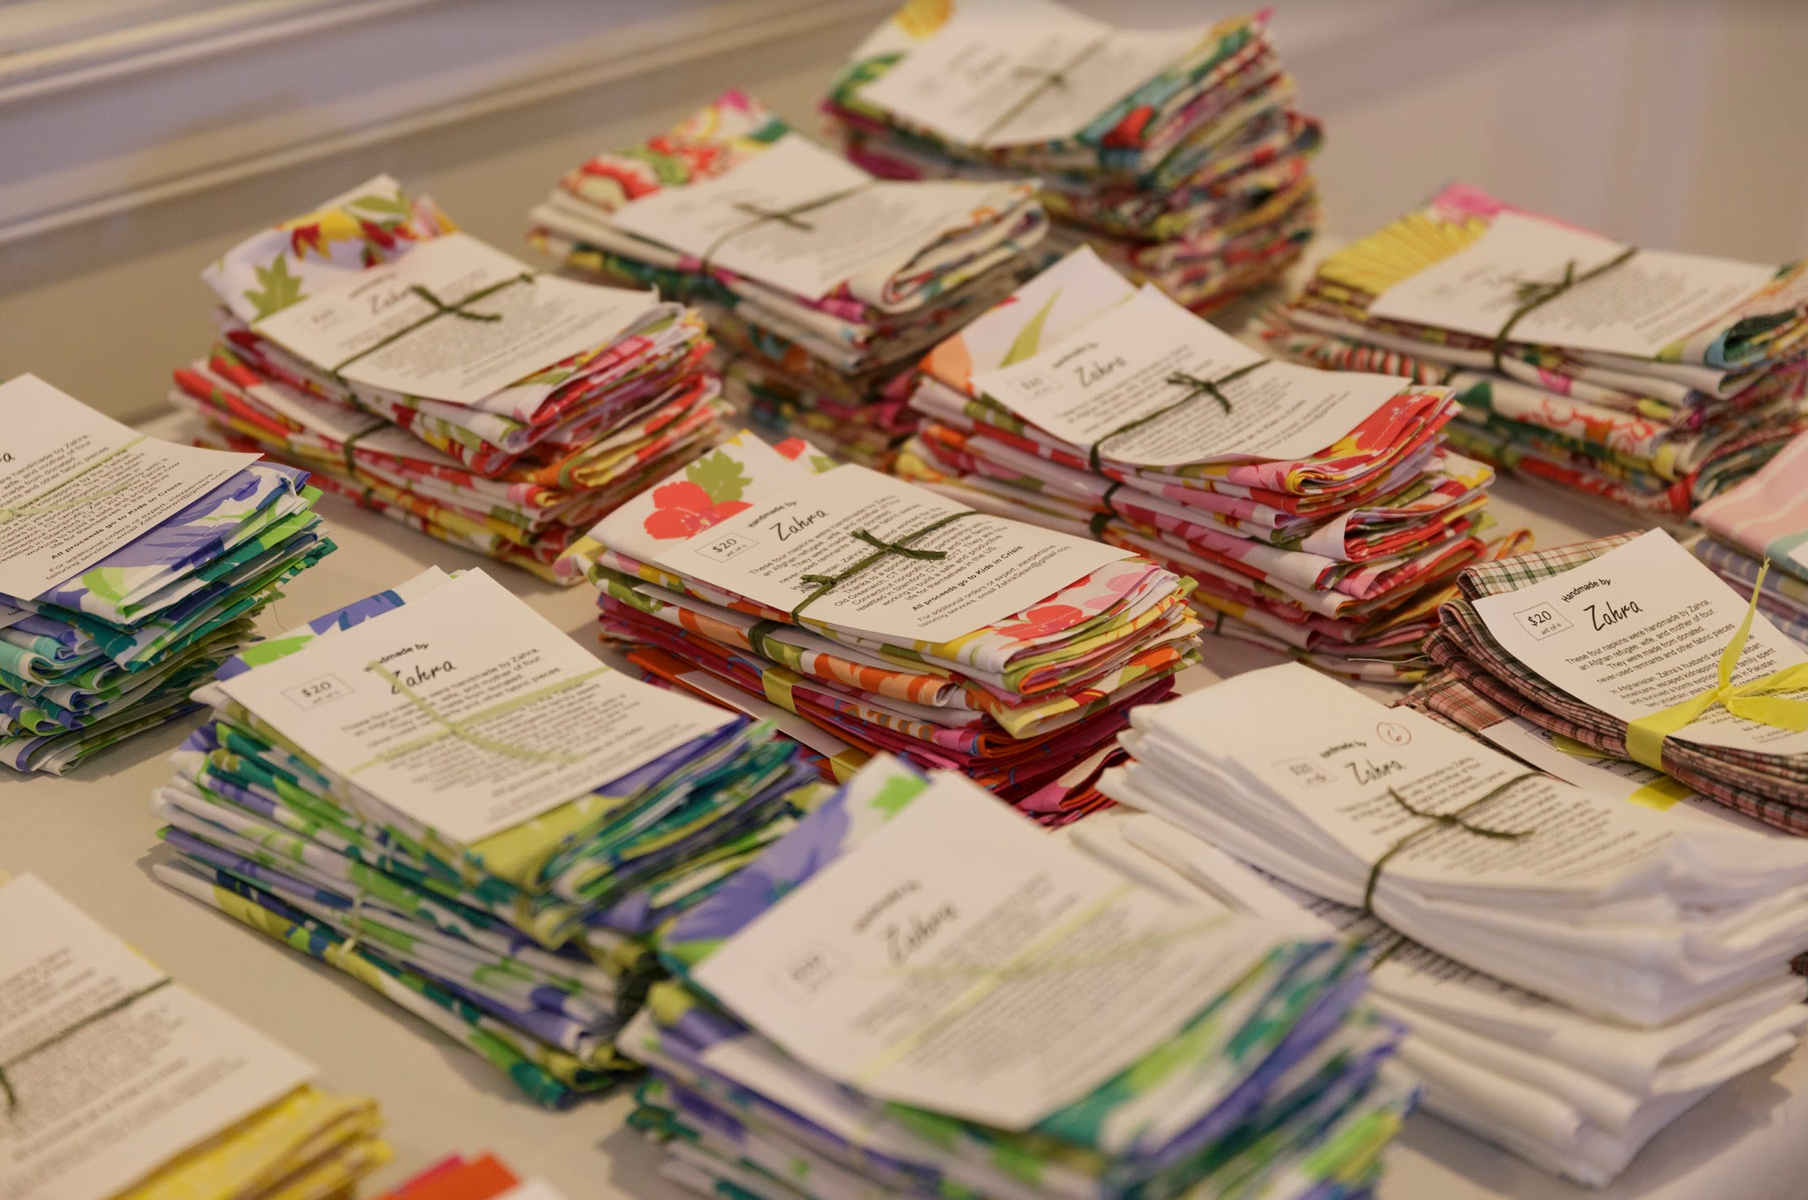 The event featured reusable napkins made by a refugee family from Afghanistan. Contributed phto